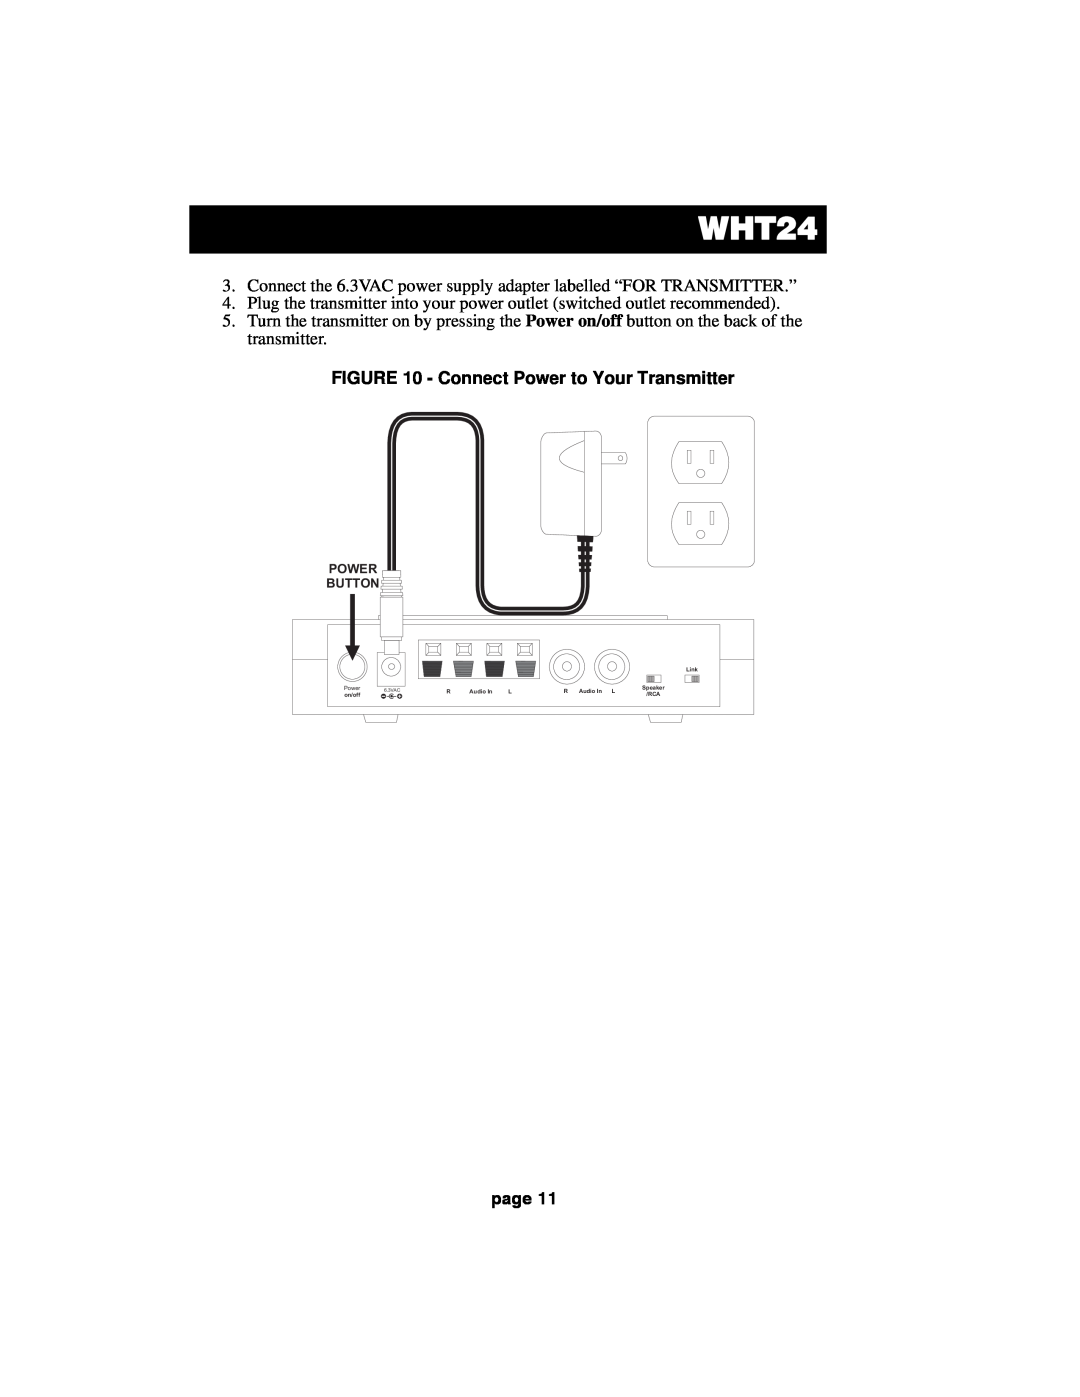 Acoustic Research HT60 operation manual WHT24, Connect Power to Your Transmitter, page, Power Button 